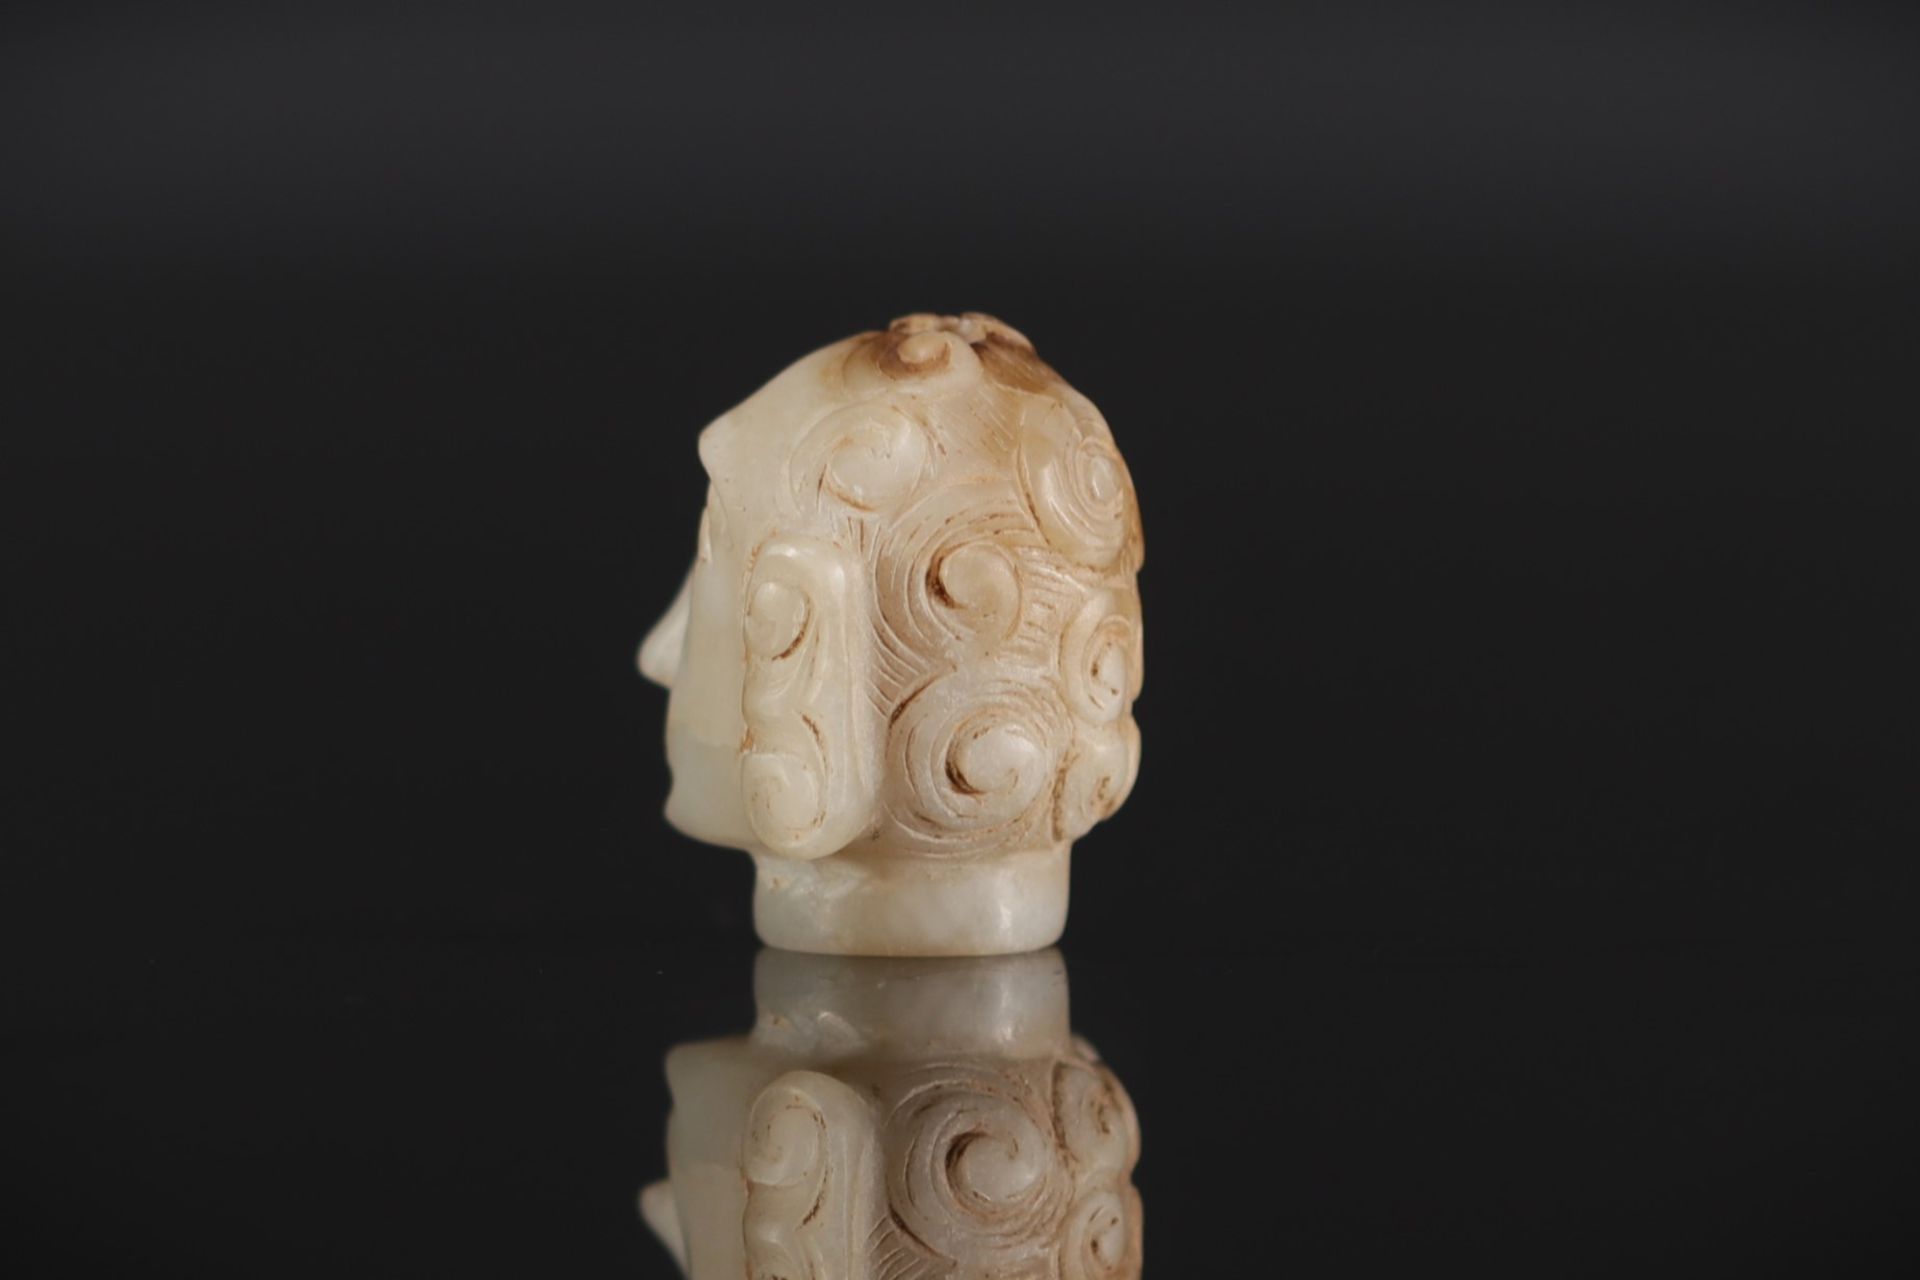 India - Carved jade head, 17th century - Image 4 of 6